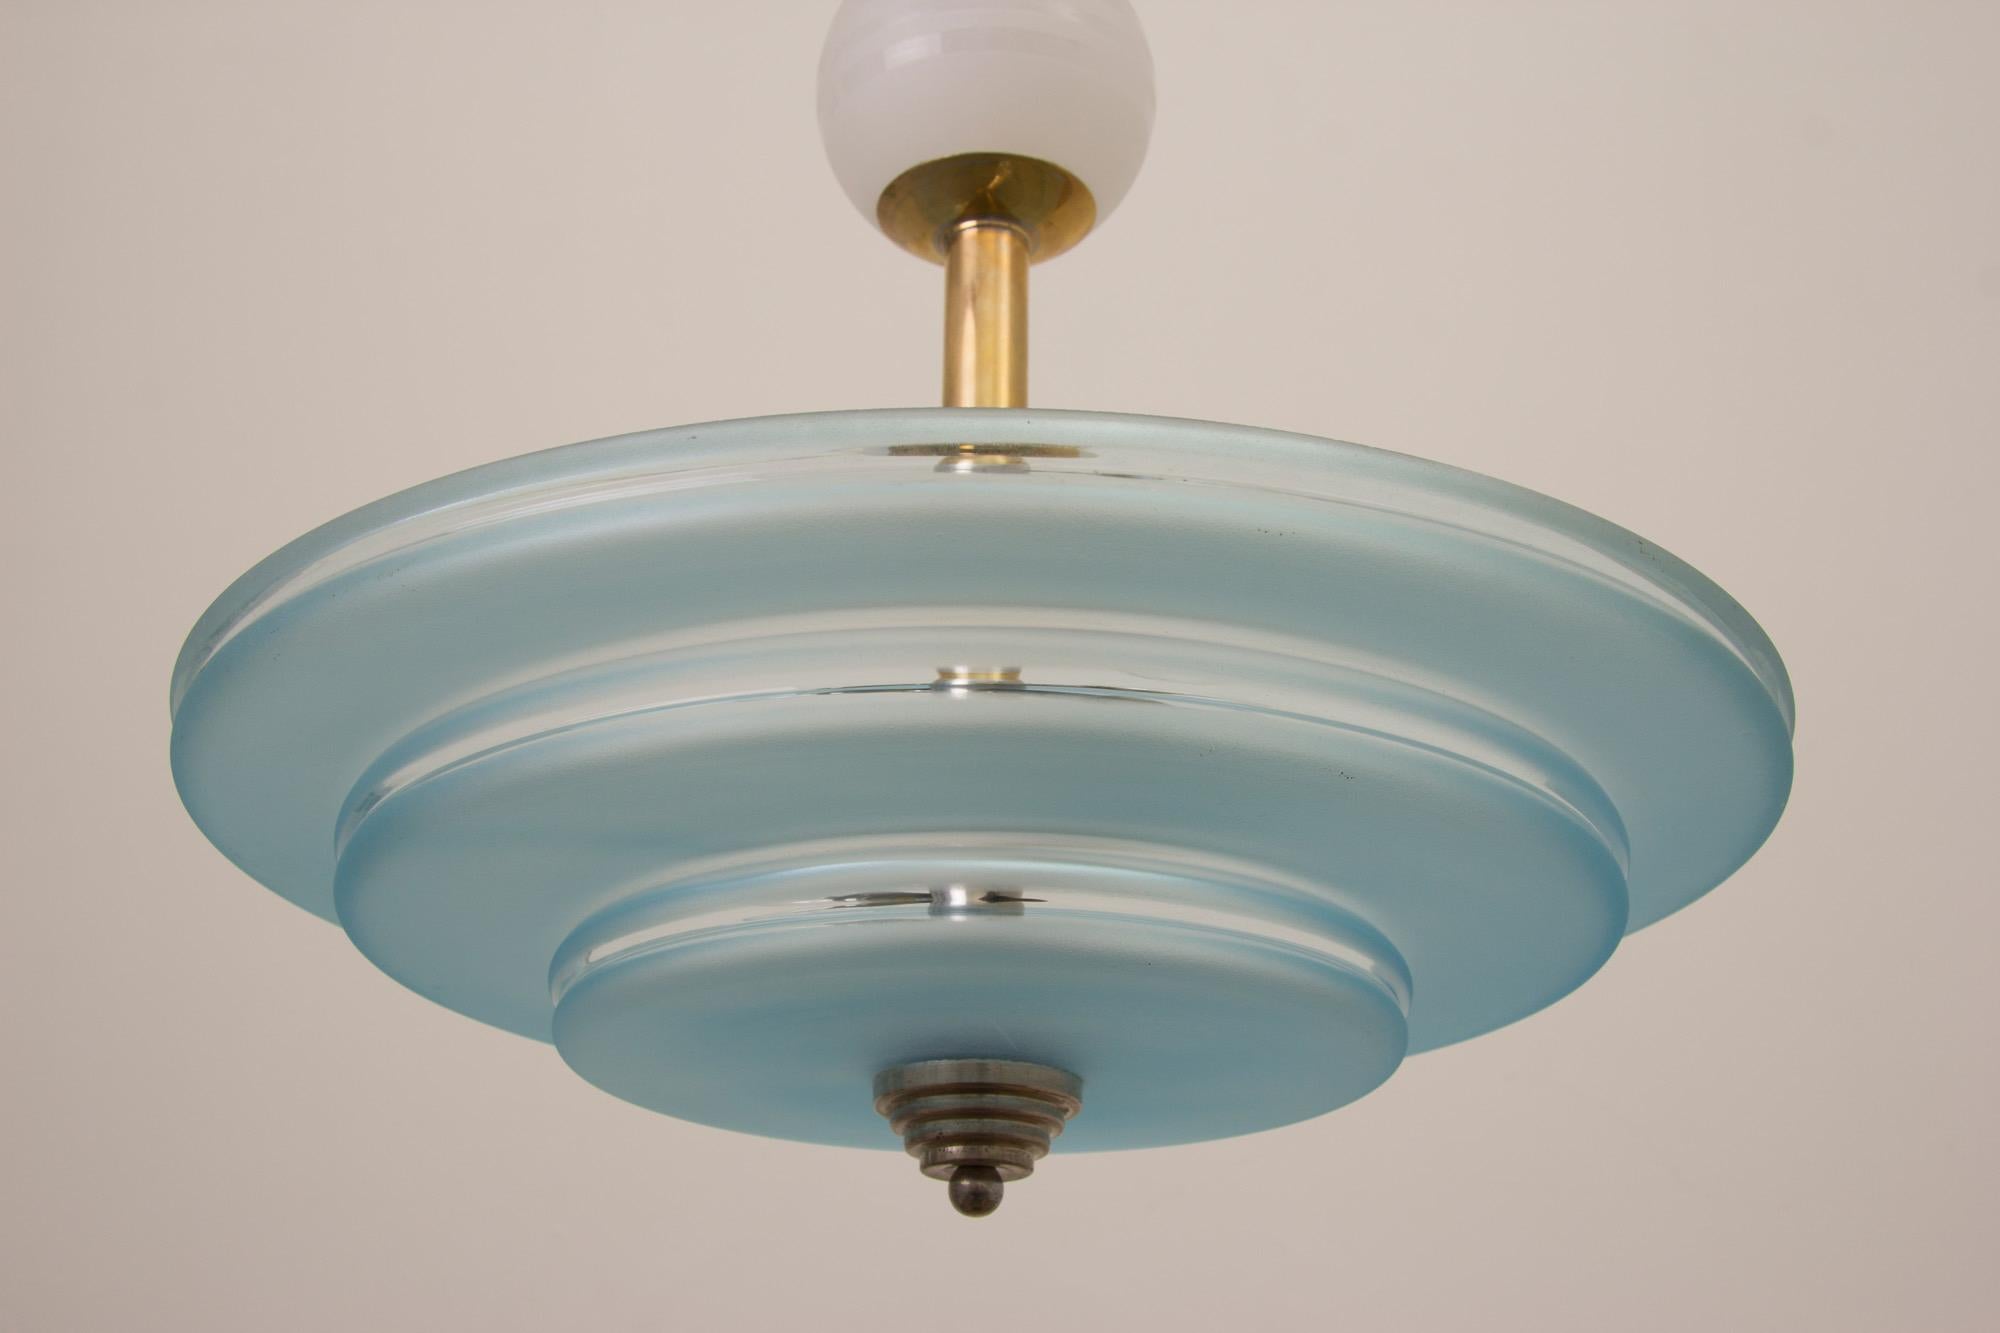 Art Deco modernist Bauhaus ceiling pendant.
Very impressive Art Deco ceiling light with stepped pale blue glass shade suspended on a two-tone polished brass and nickel plate column with white ceramic ball.
Measures: H 58 cm, W 41 cm, D 41